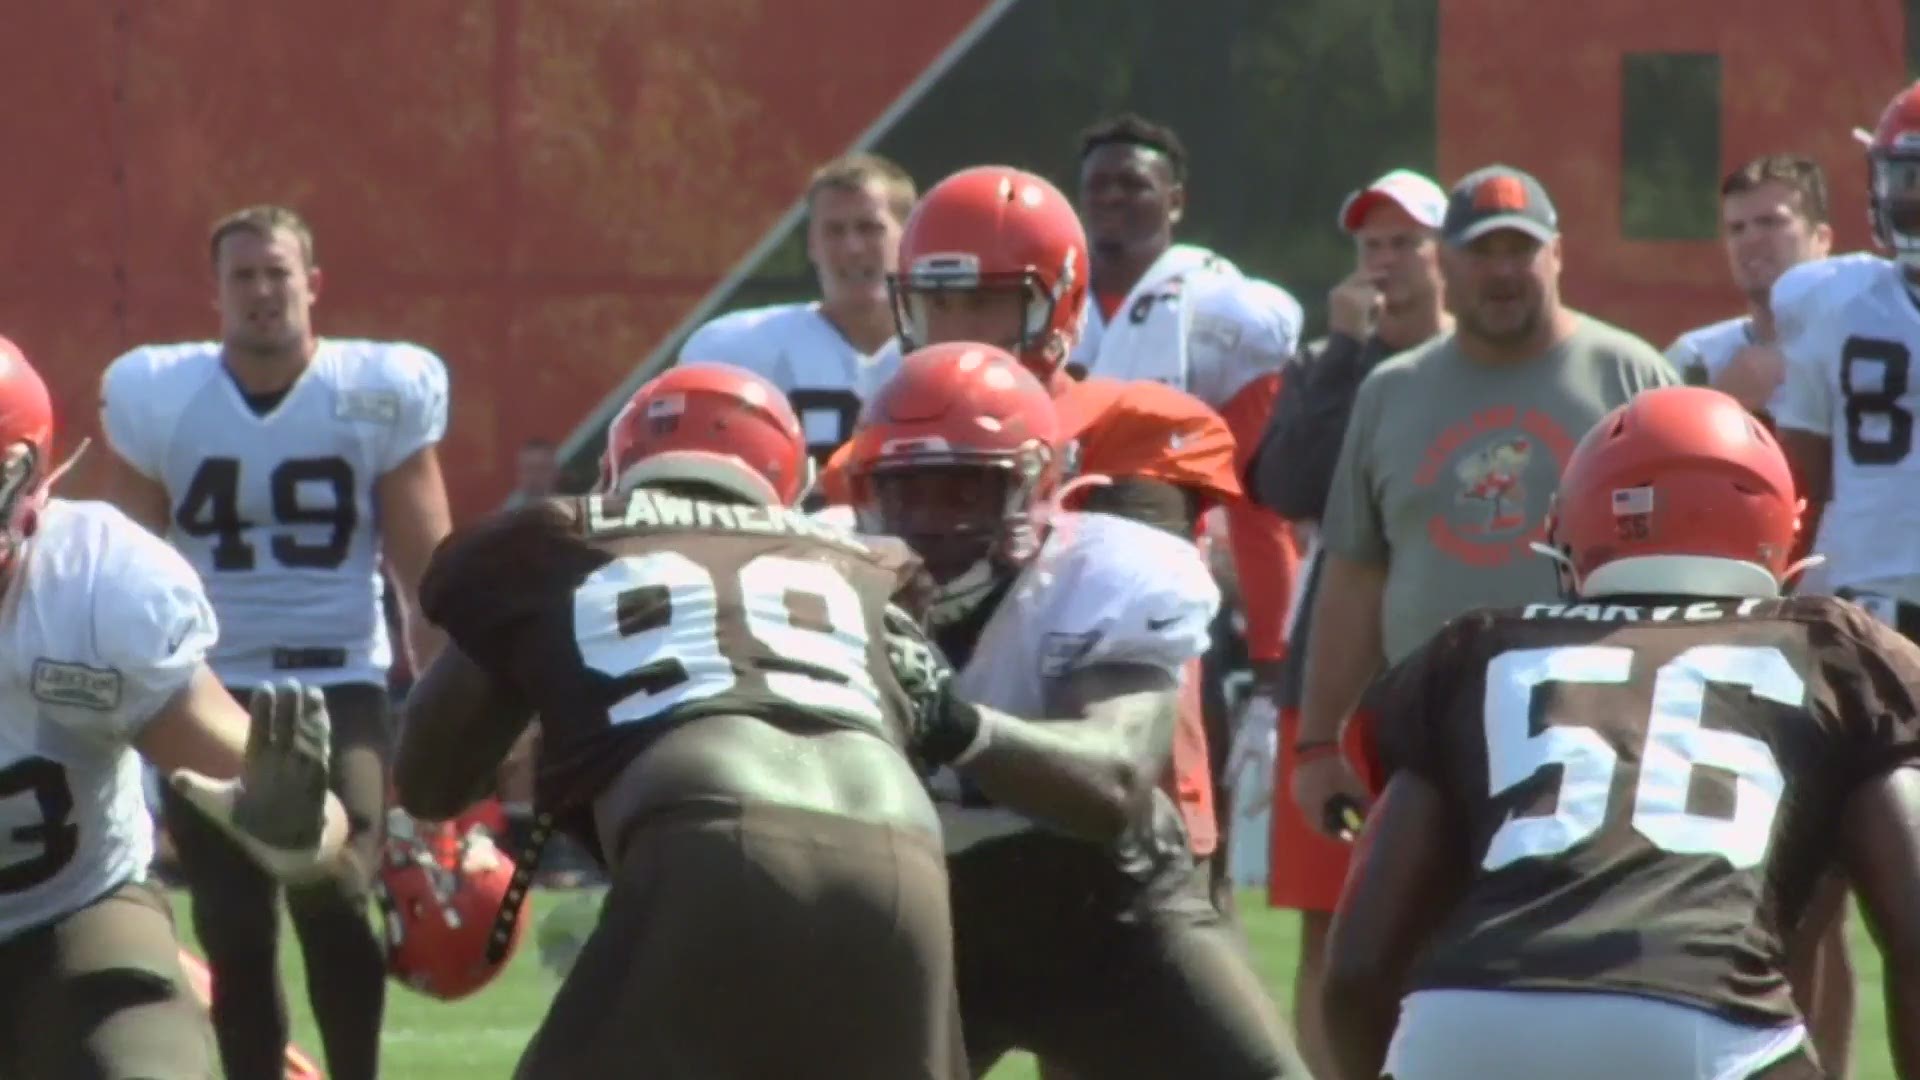 Cleveland Browns safety J.T. Hassell, who was born with two fingers on his left hand, made an impressive diving interception during Tuesday's practice. The undrafted rookie out of Florida Tech is hoping to defy the odds to make the 53-man roster.